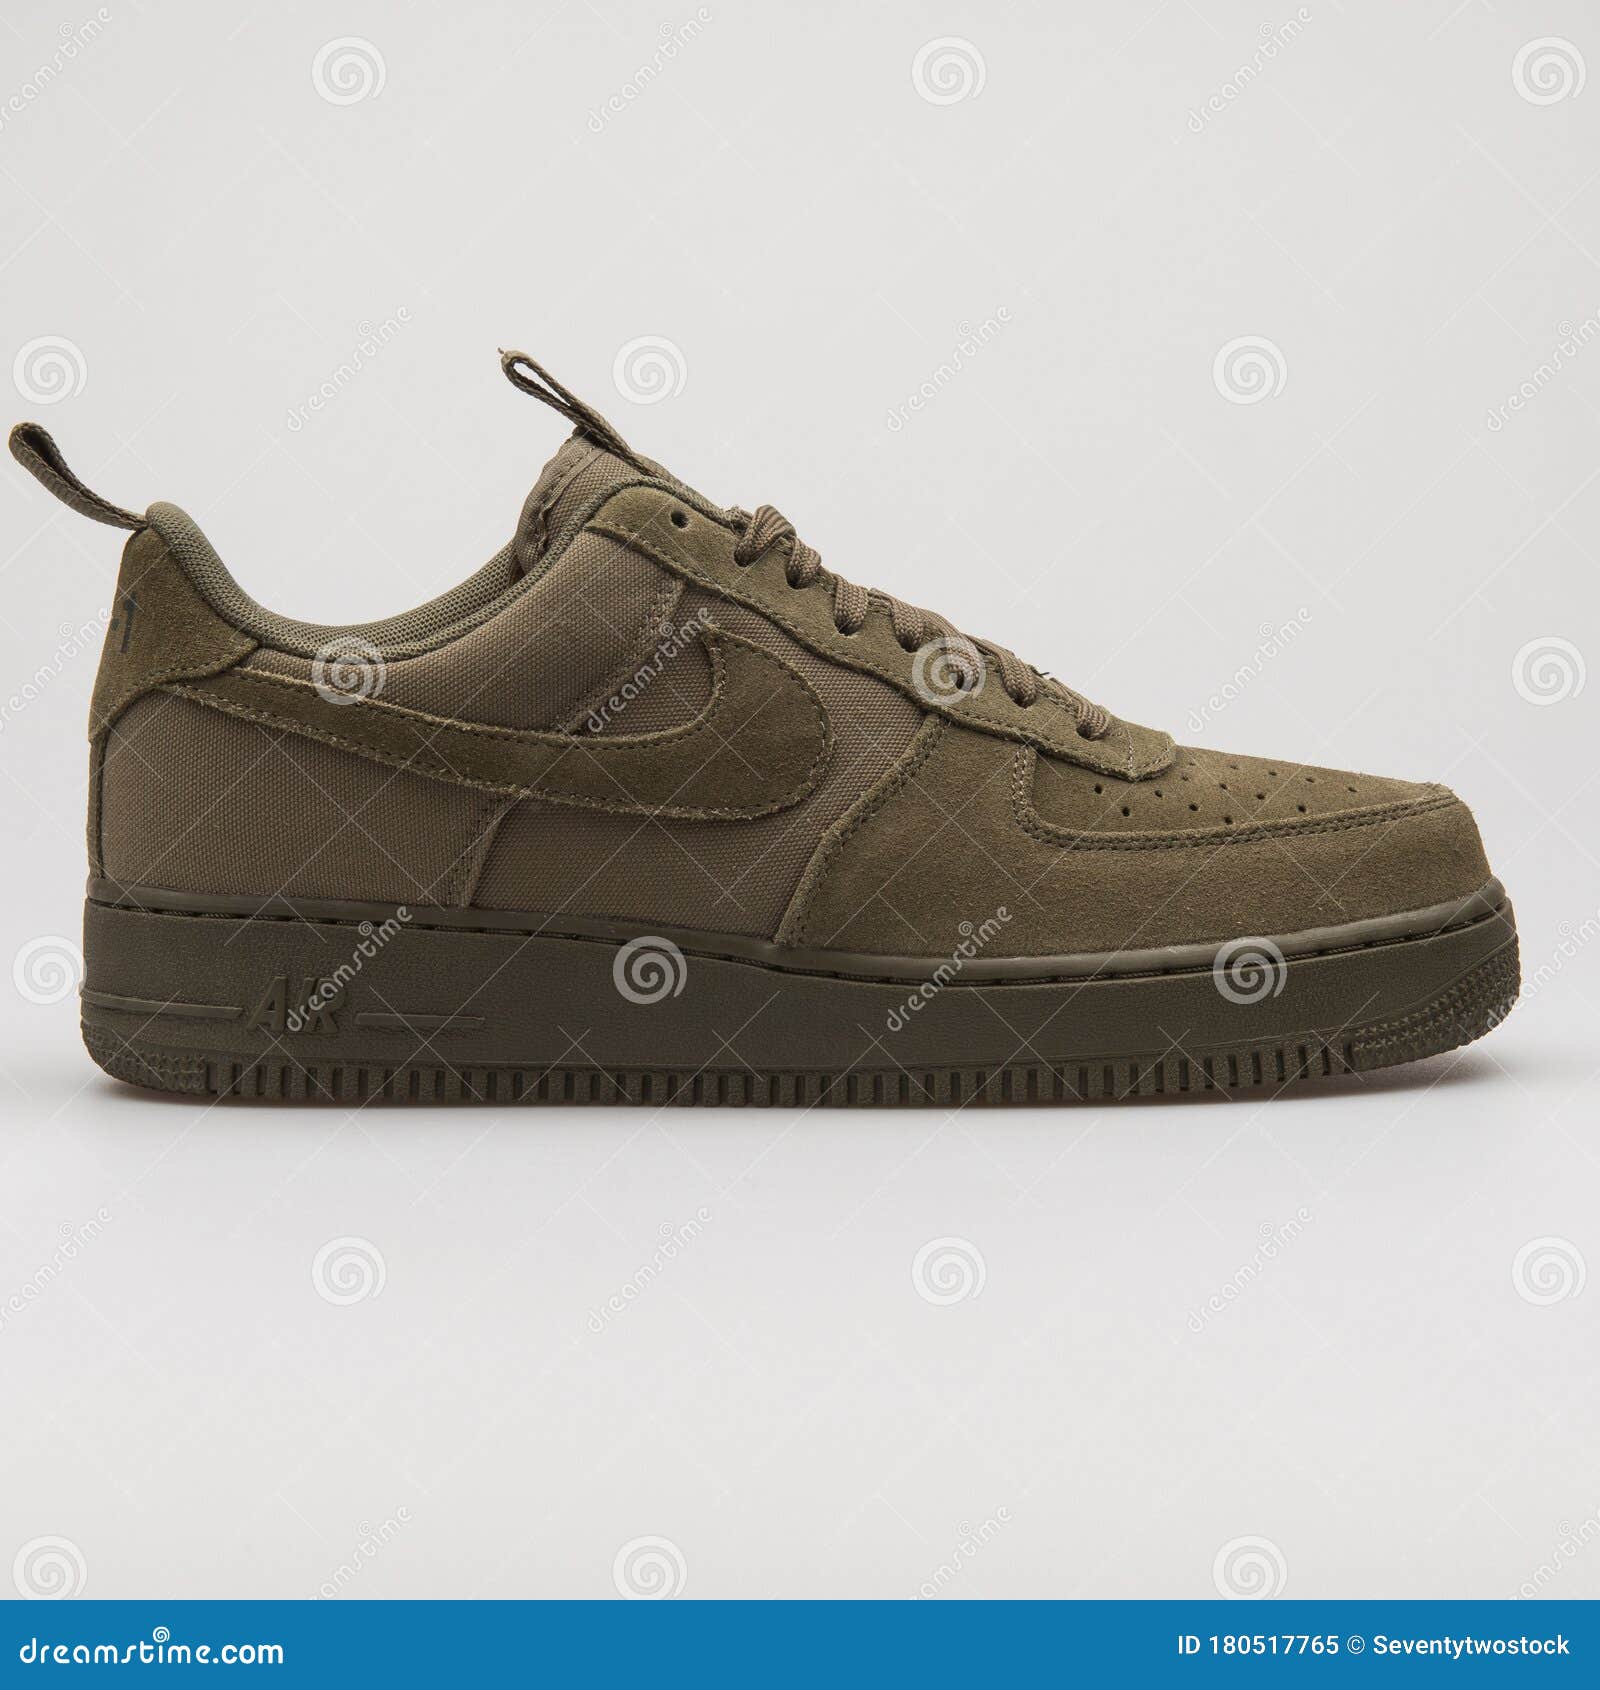 Nike Air Force 1 07 Olive Green Sneaker Editorial Image - Image of life, product: 180517765